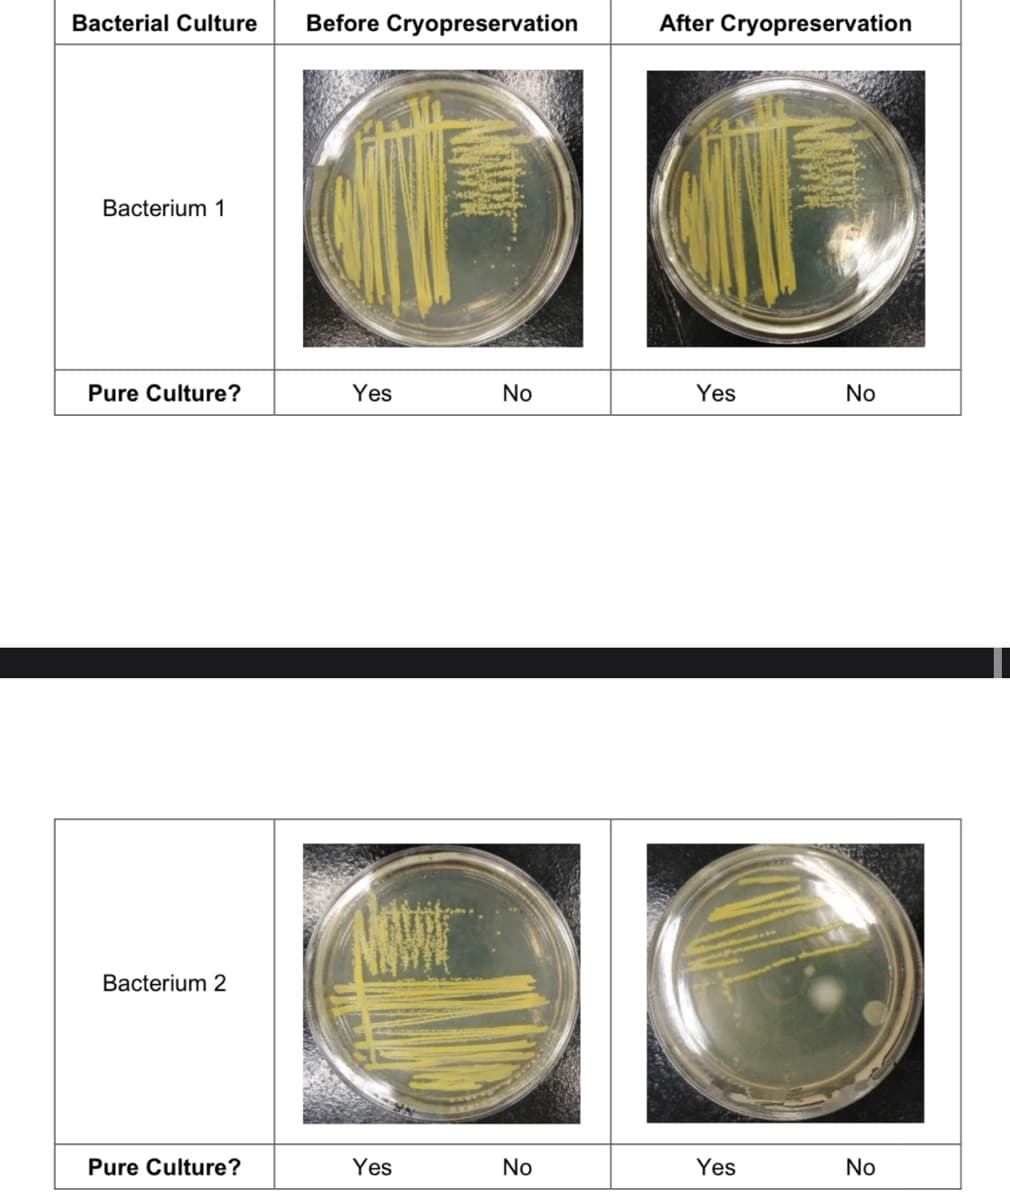 Bacterial Culture Before Cryopreservation
Bacterium 1
Pure Culture?
Bacterium 2
Pure Culture?
Yes
NOVE
NOWE
Yes
No
No
After Cryopreservation
Yes
Yes
No
No